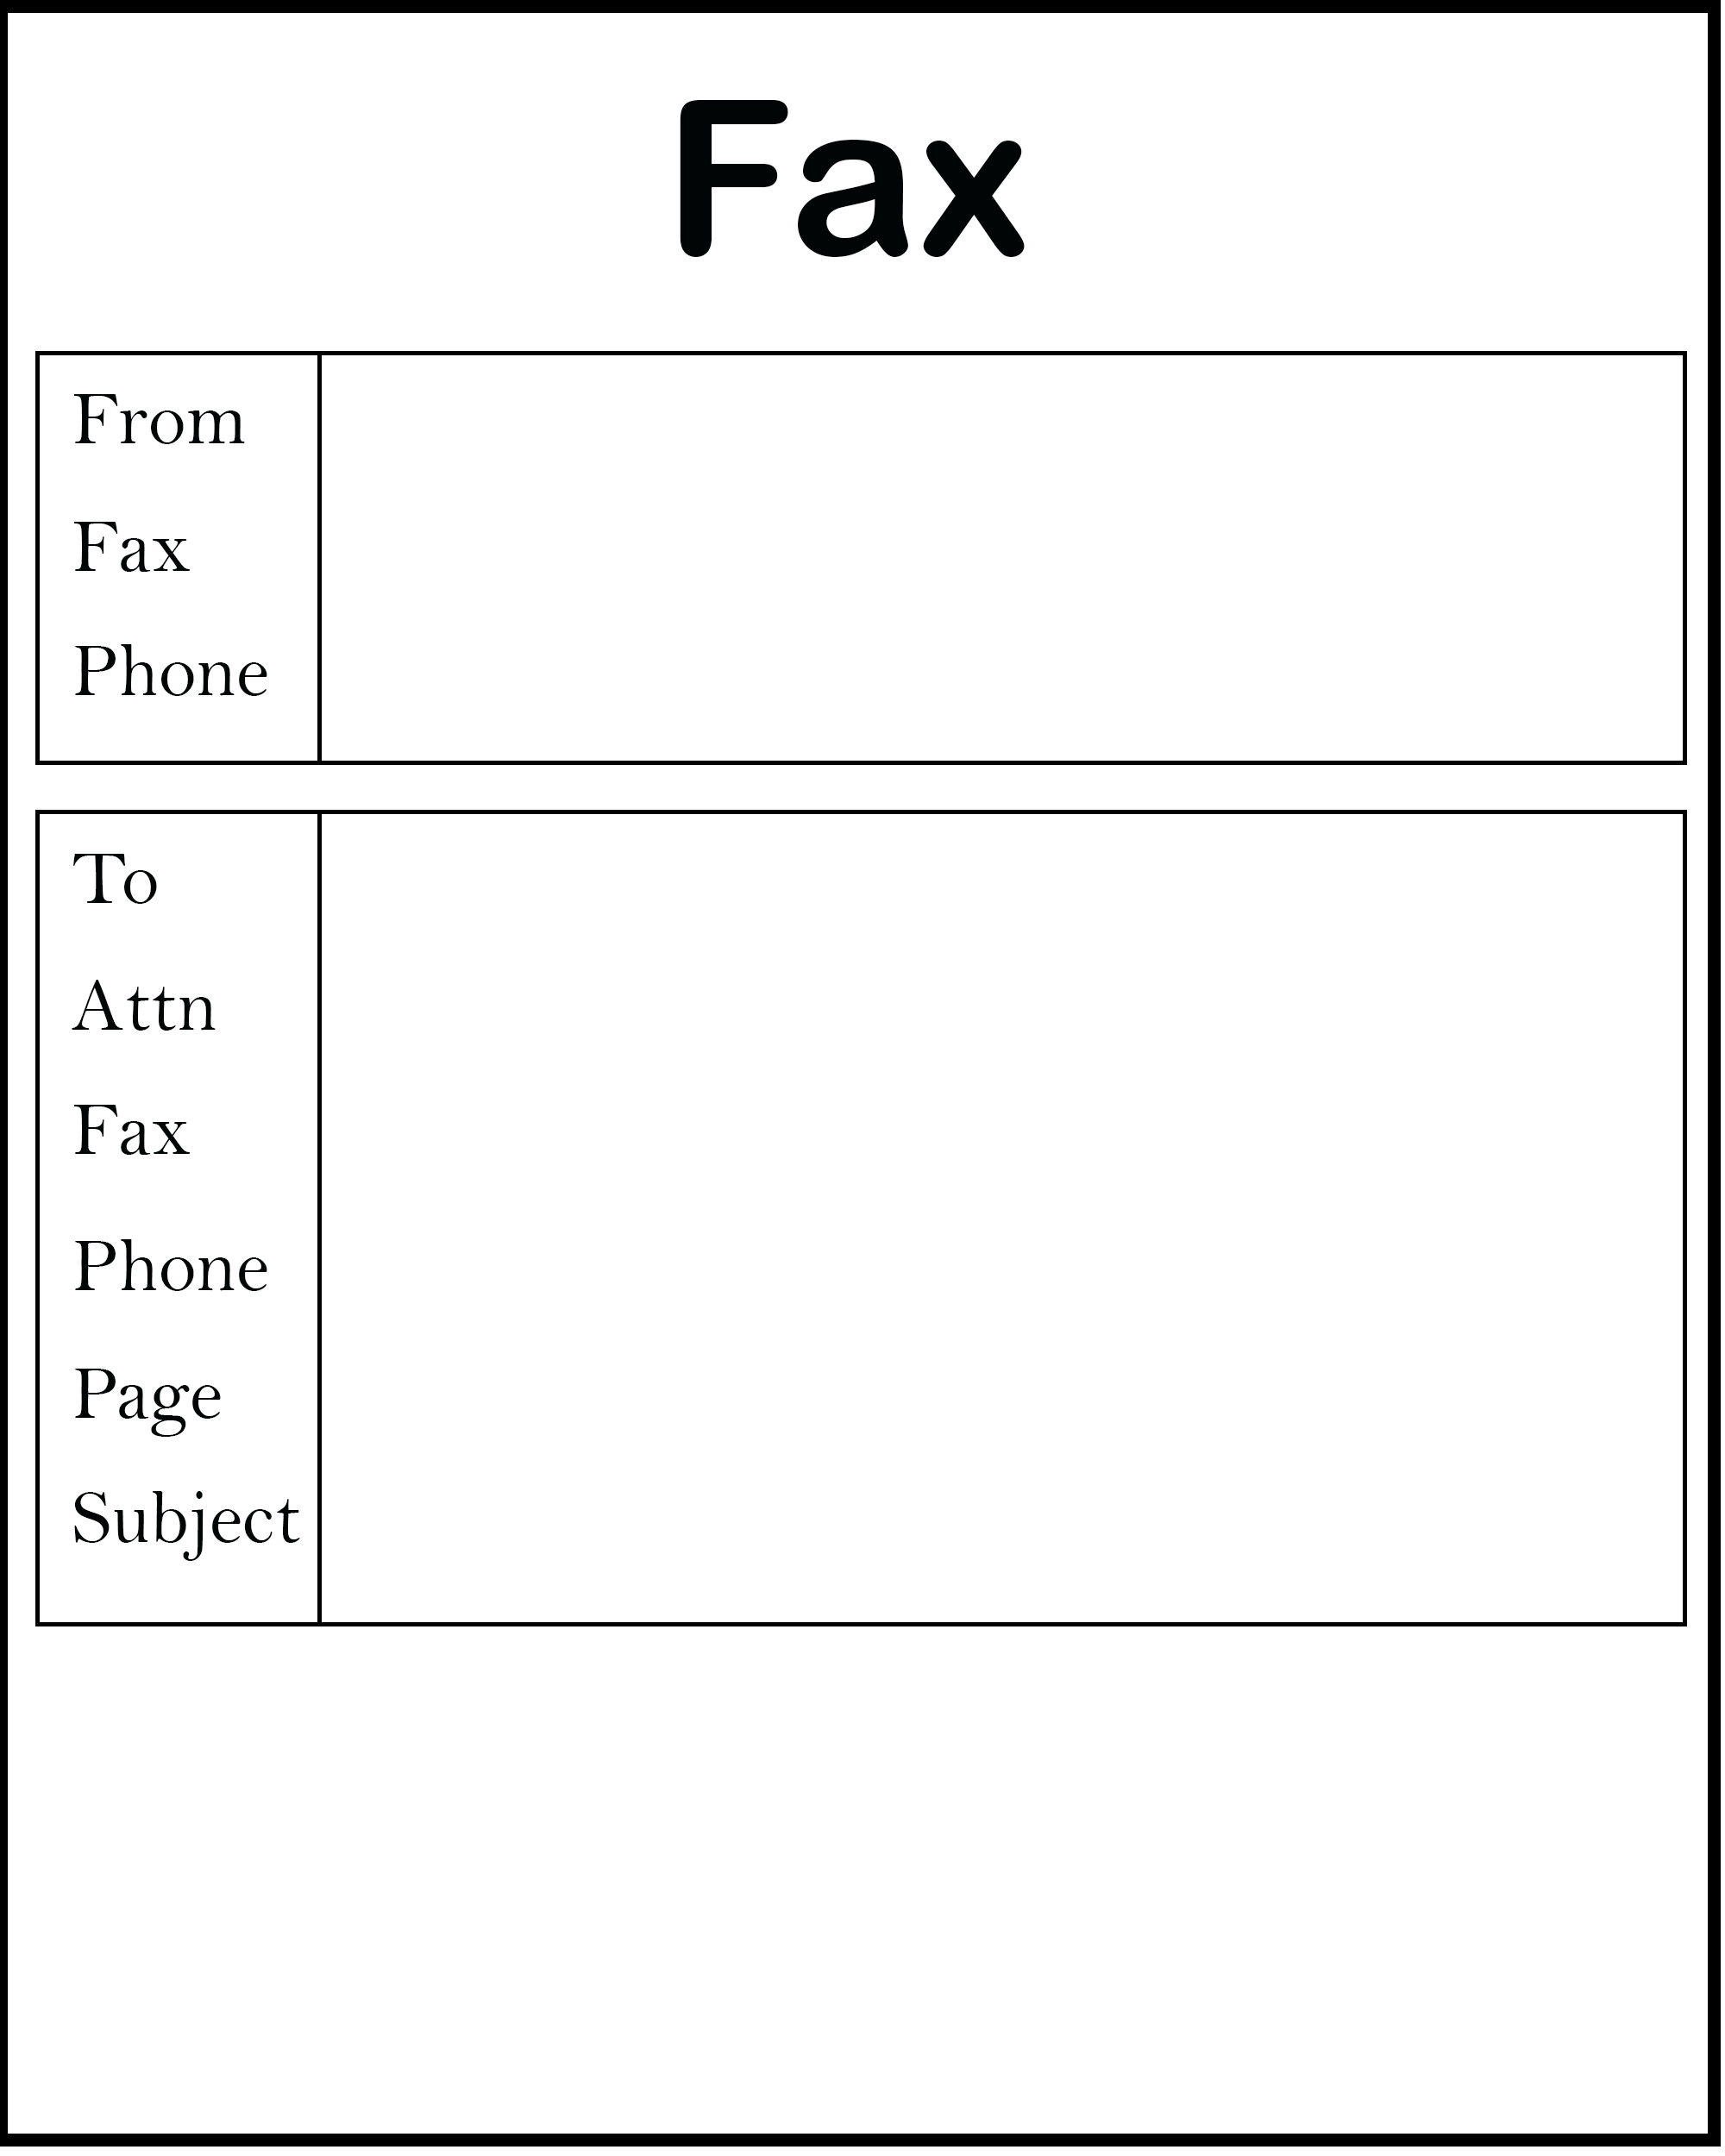 Fax Cover Sheet Free Blank Printable Template in PDF